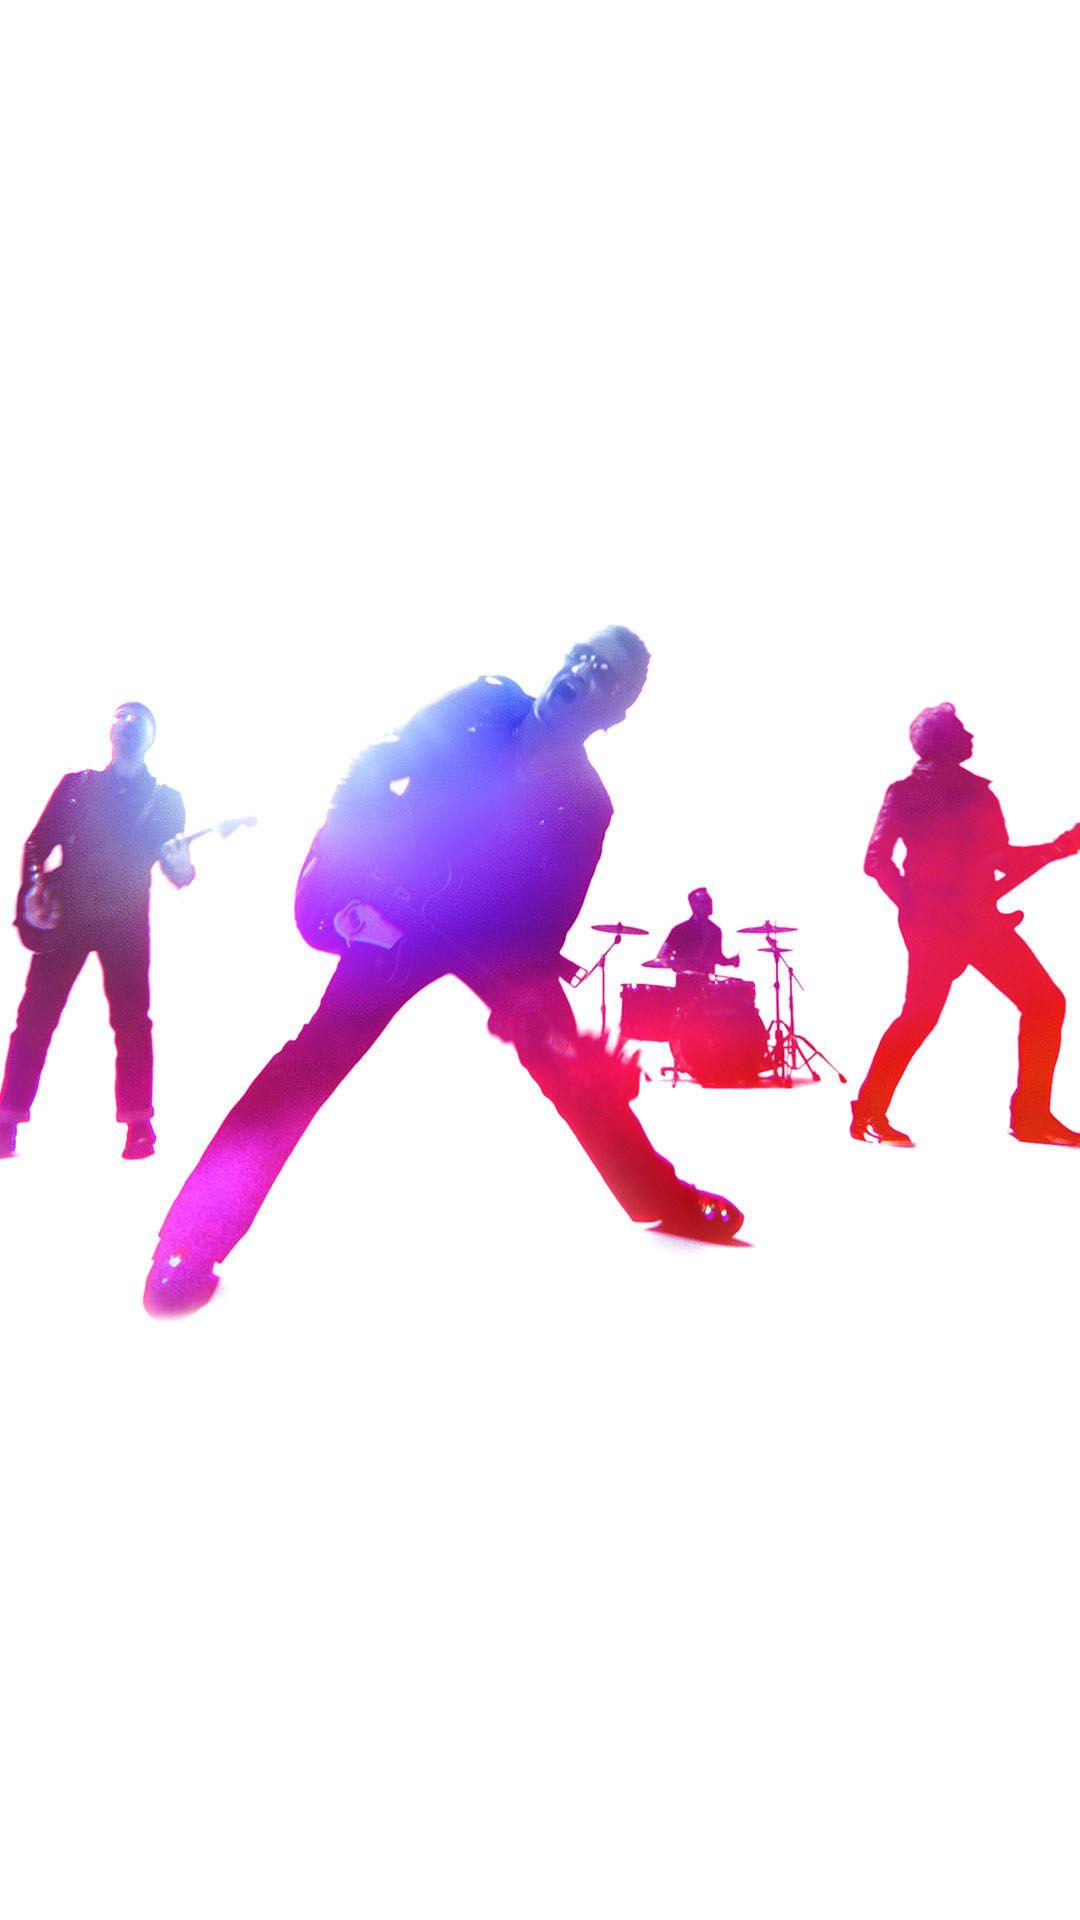 U2 Band Colorful Concert Android Wallpaper free download